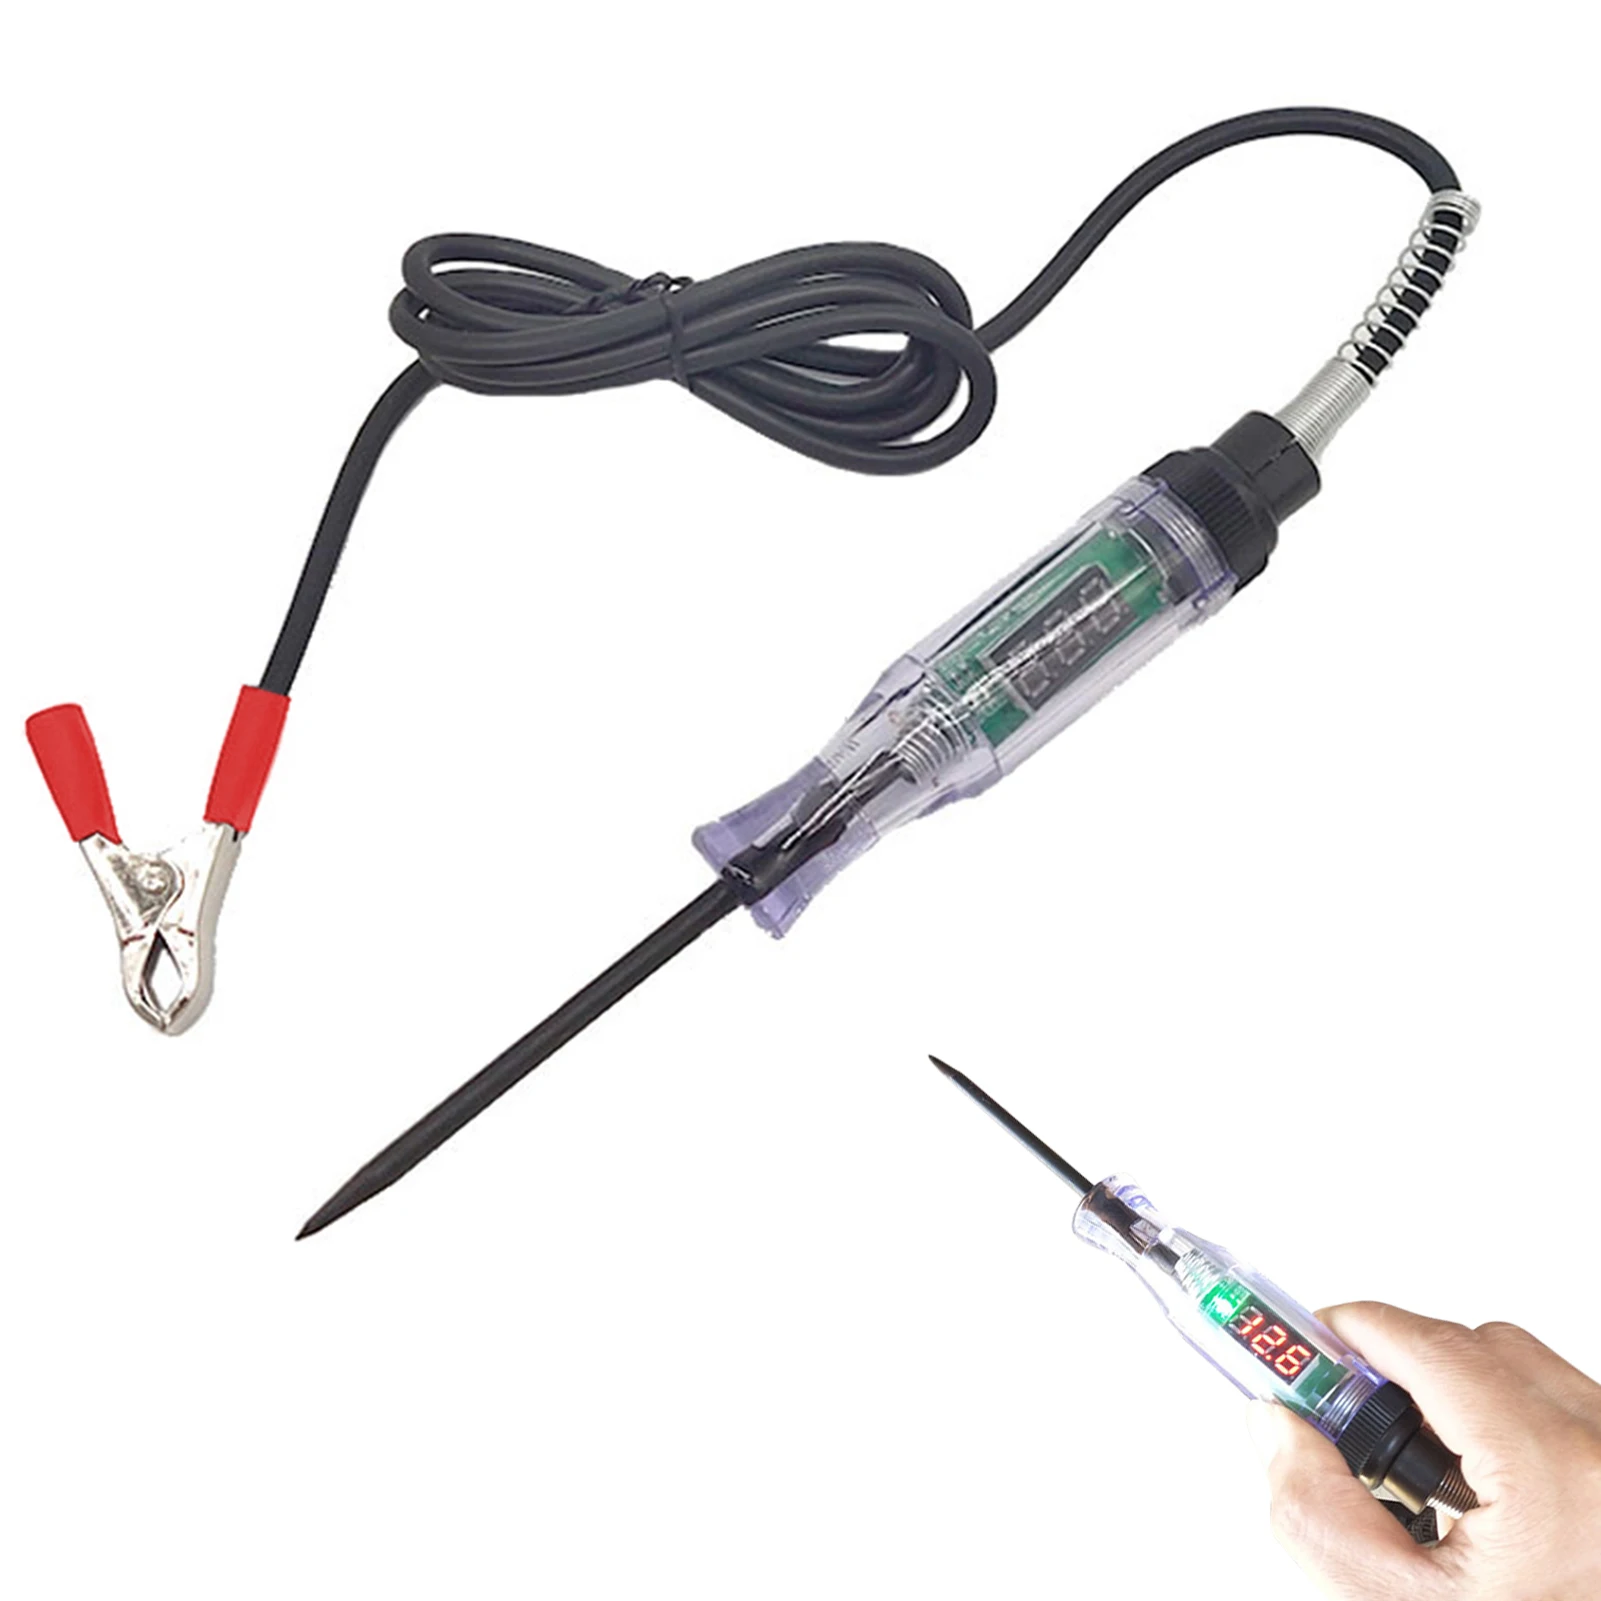 Backlit Digital LCD 3-48V Circuit Tester Car Truck Low Voltage & Automotive Test Light Tester Power Measuring Pen car 2 in 1 voltmeter thermometer electric led voltage temperature meter high accuracy automotive measuring tool red light